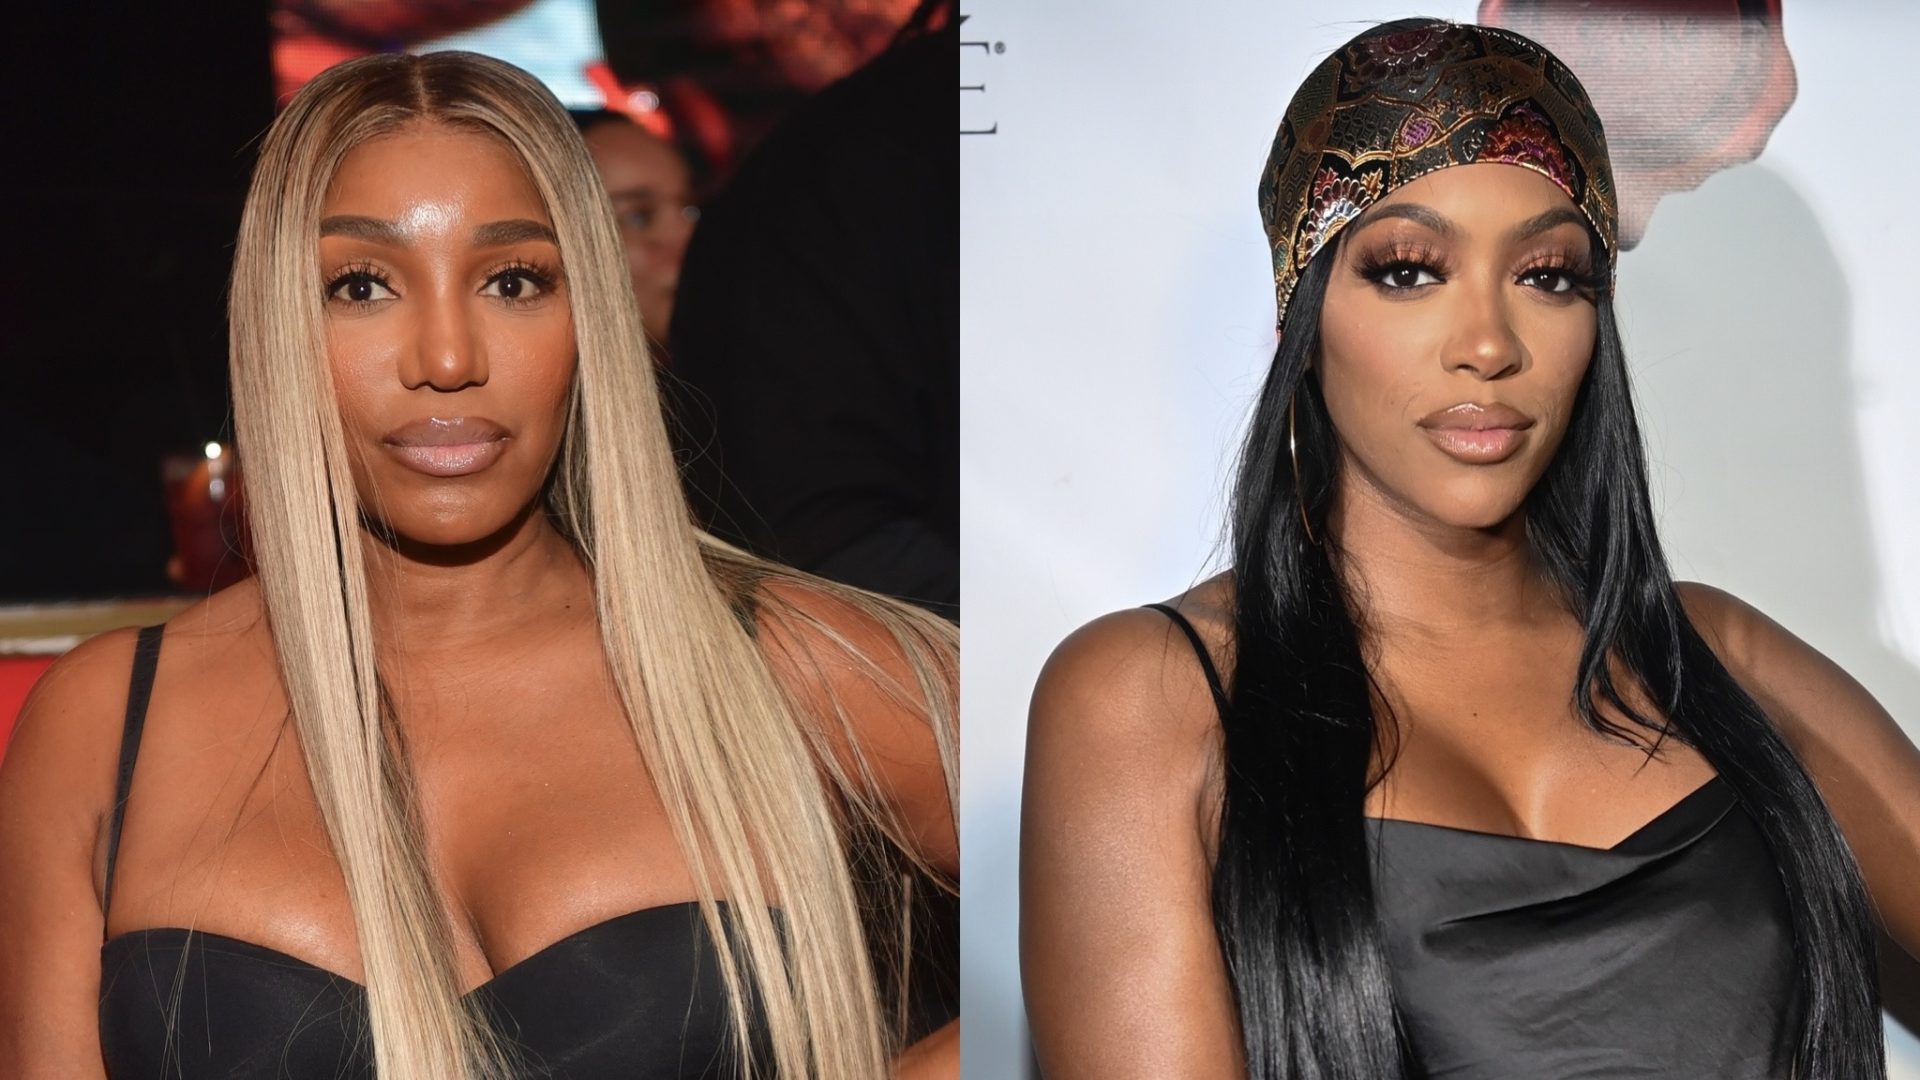 Oop! NeNe Leakes Accuses Porsha Williams Of Refusing To Work With Her In Upcoming Sitcom Appearance (WATCH)